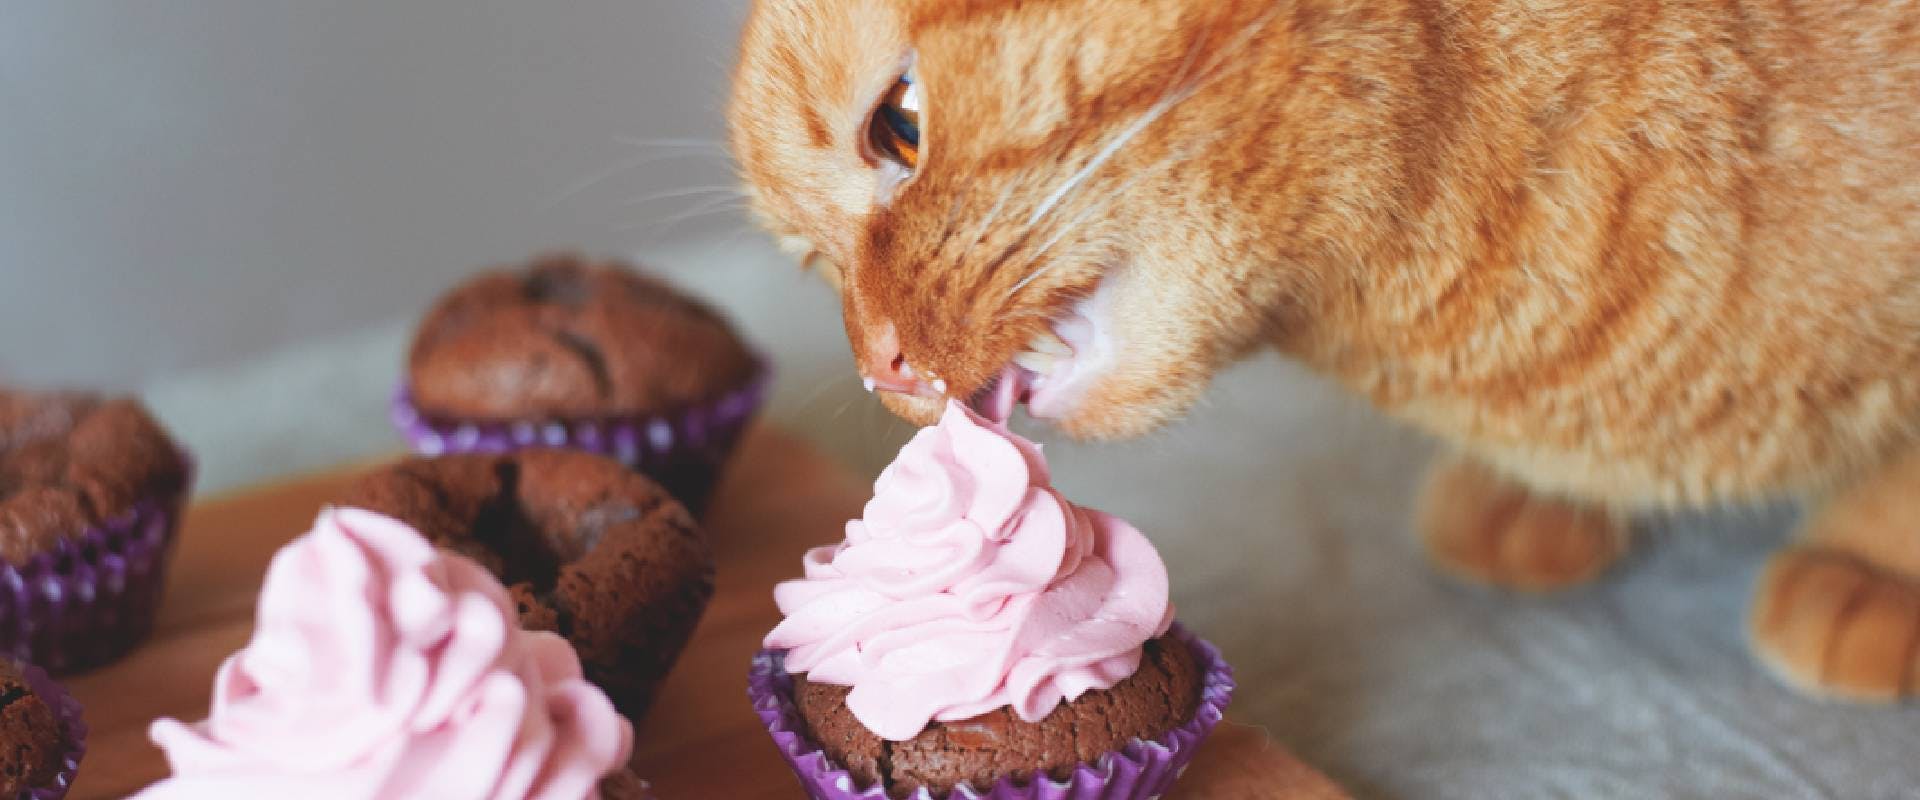 Cat eating butter icing